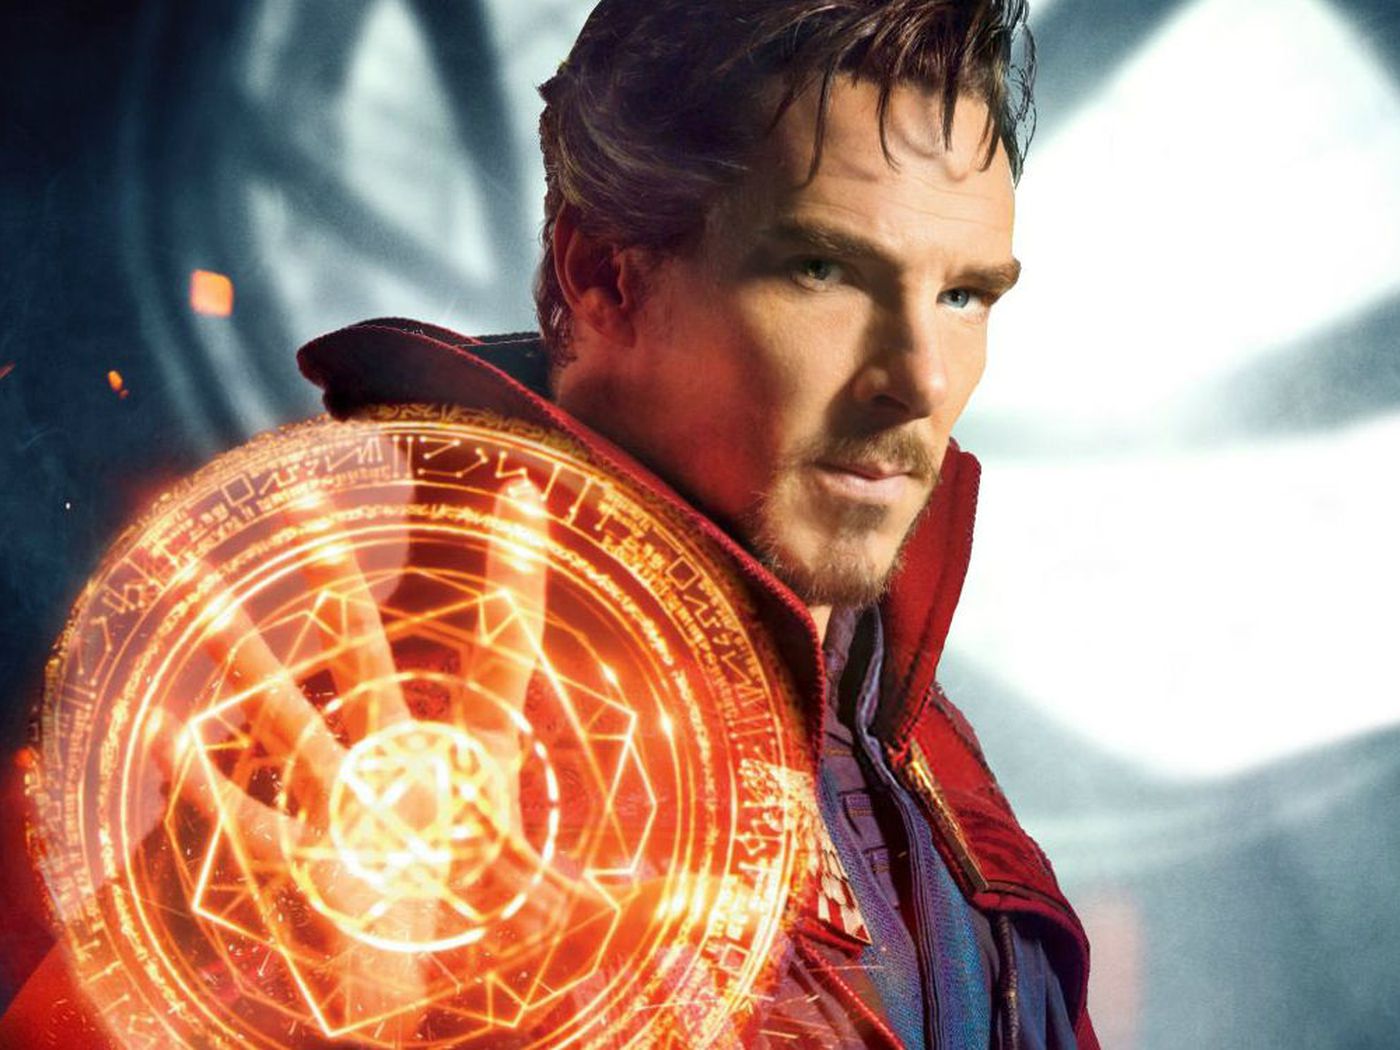 Doctor Strange's murky morality brings it close to being a supervillain origin story